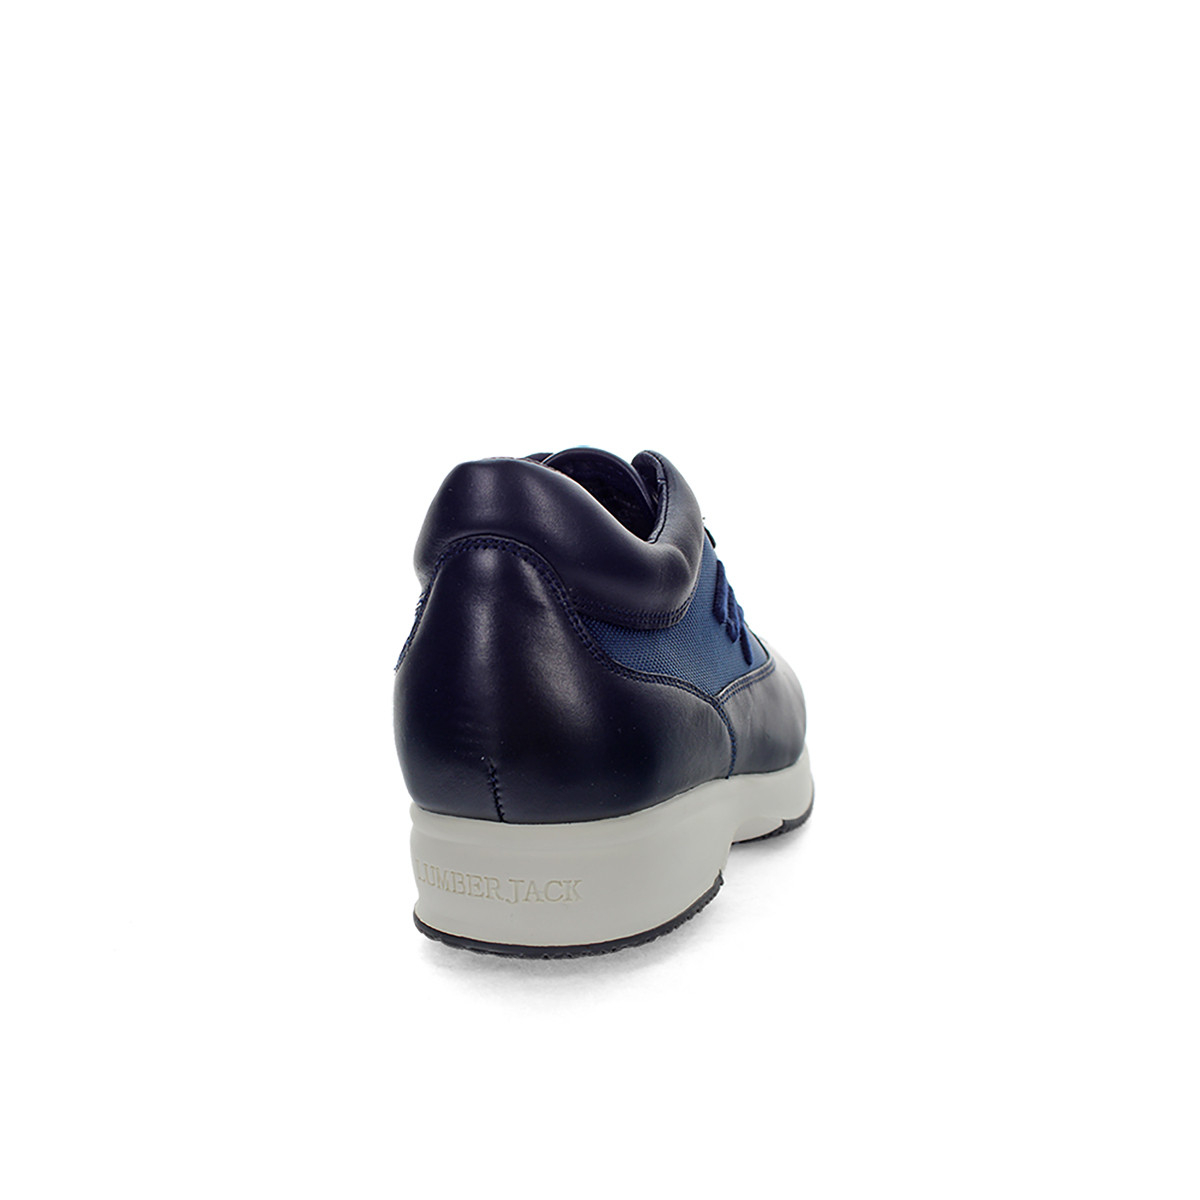 RAUL CASUAL SHOES UOMO